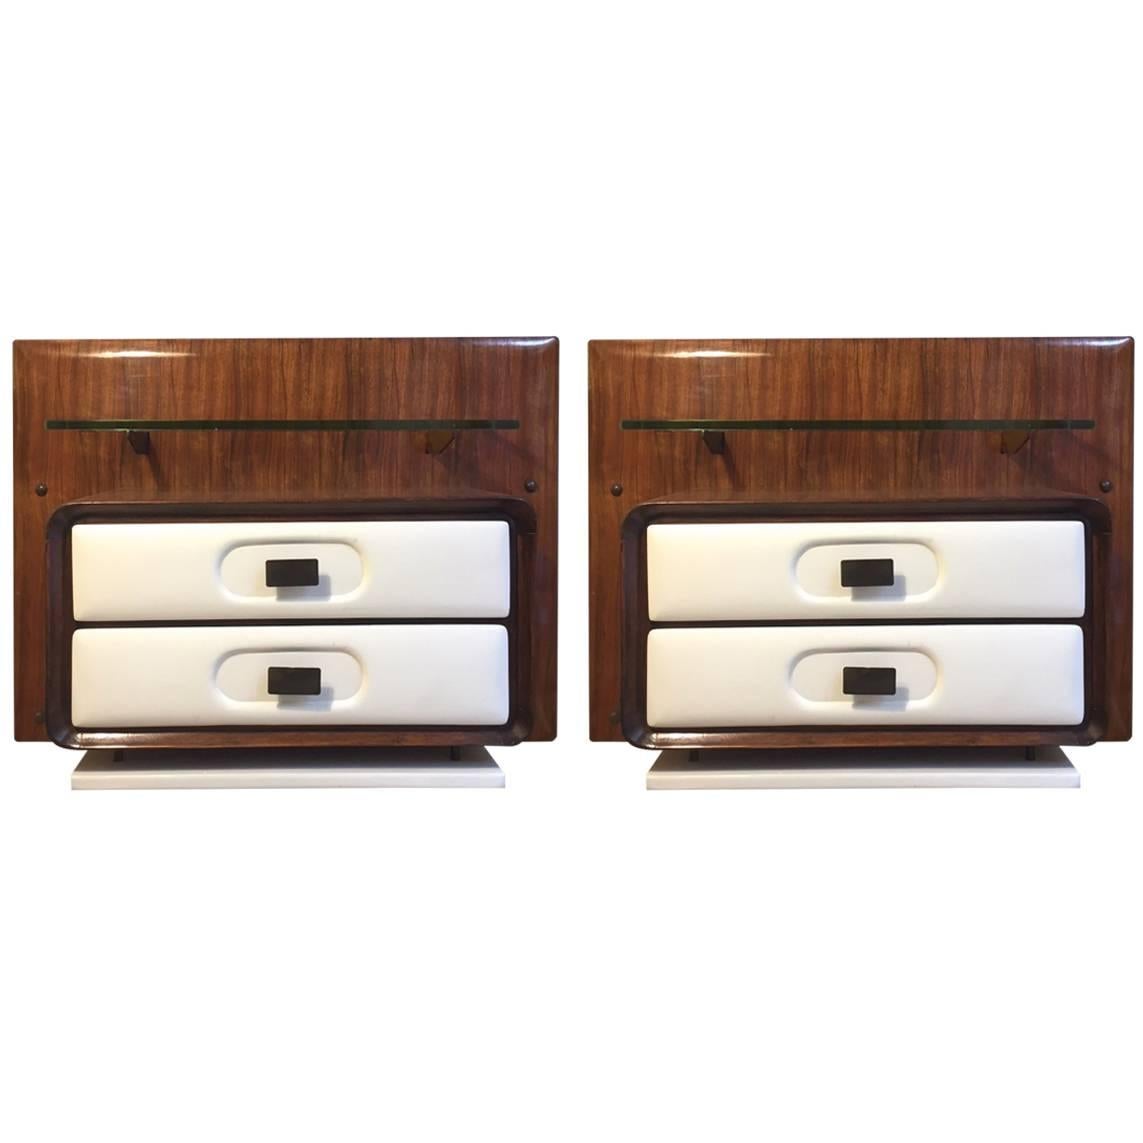 Melchiore Vega Pair of Wall-Mounted Nightstands, 1960